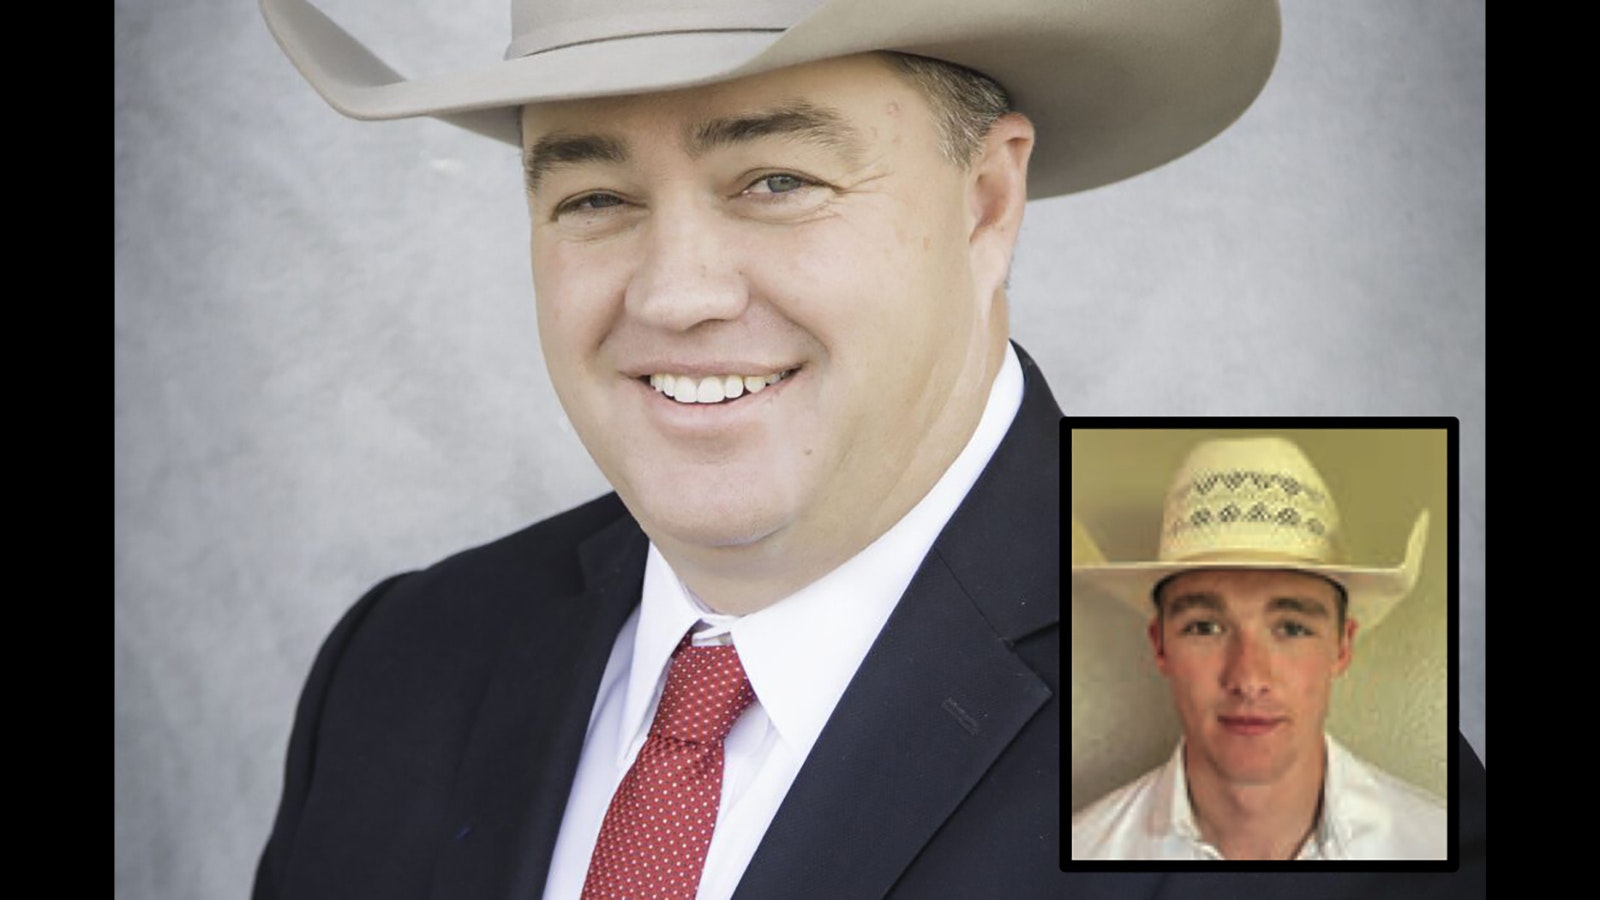 Warren Thompson's son, Ty, has been an auctioneer himself for more than 30 years. And his grandson, Jace, recently won Rookie of the Year at the 2023 Calgary Stampede International Livestock Auctioneer Championship.